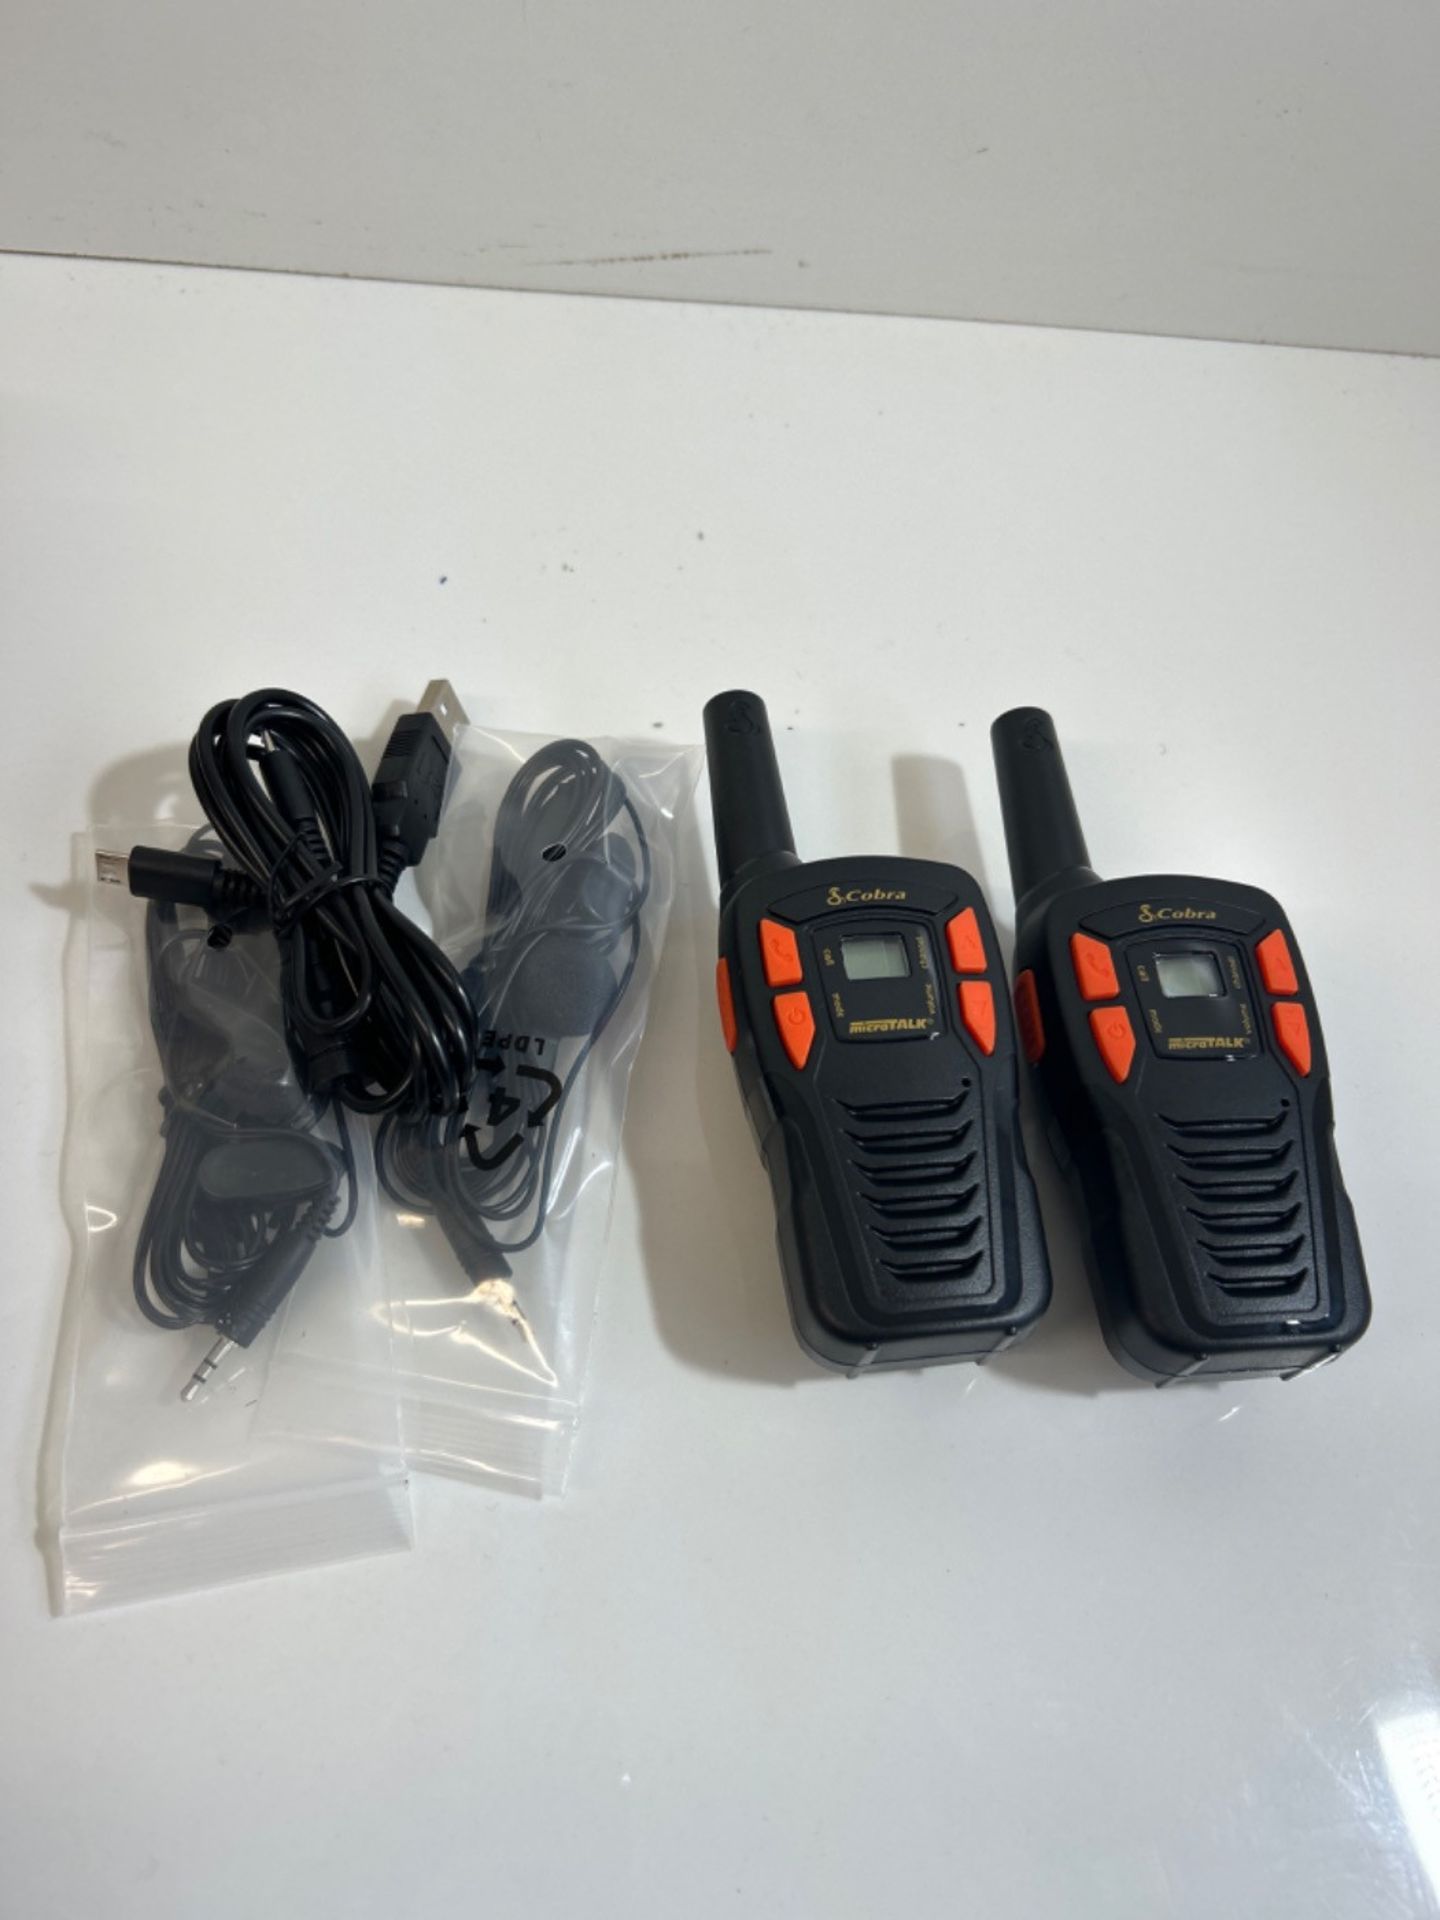 Cobra AM245 BBX Walkie Talkie - Weather Resistant With GA-EBM2 Earbud Microphone and Rechargeable... - Image 3 of 3